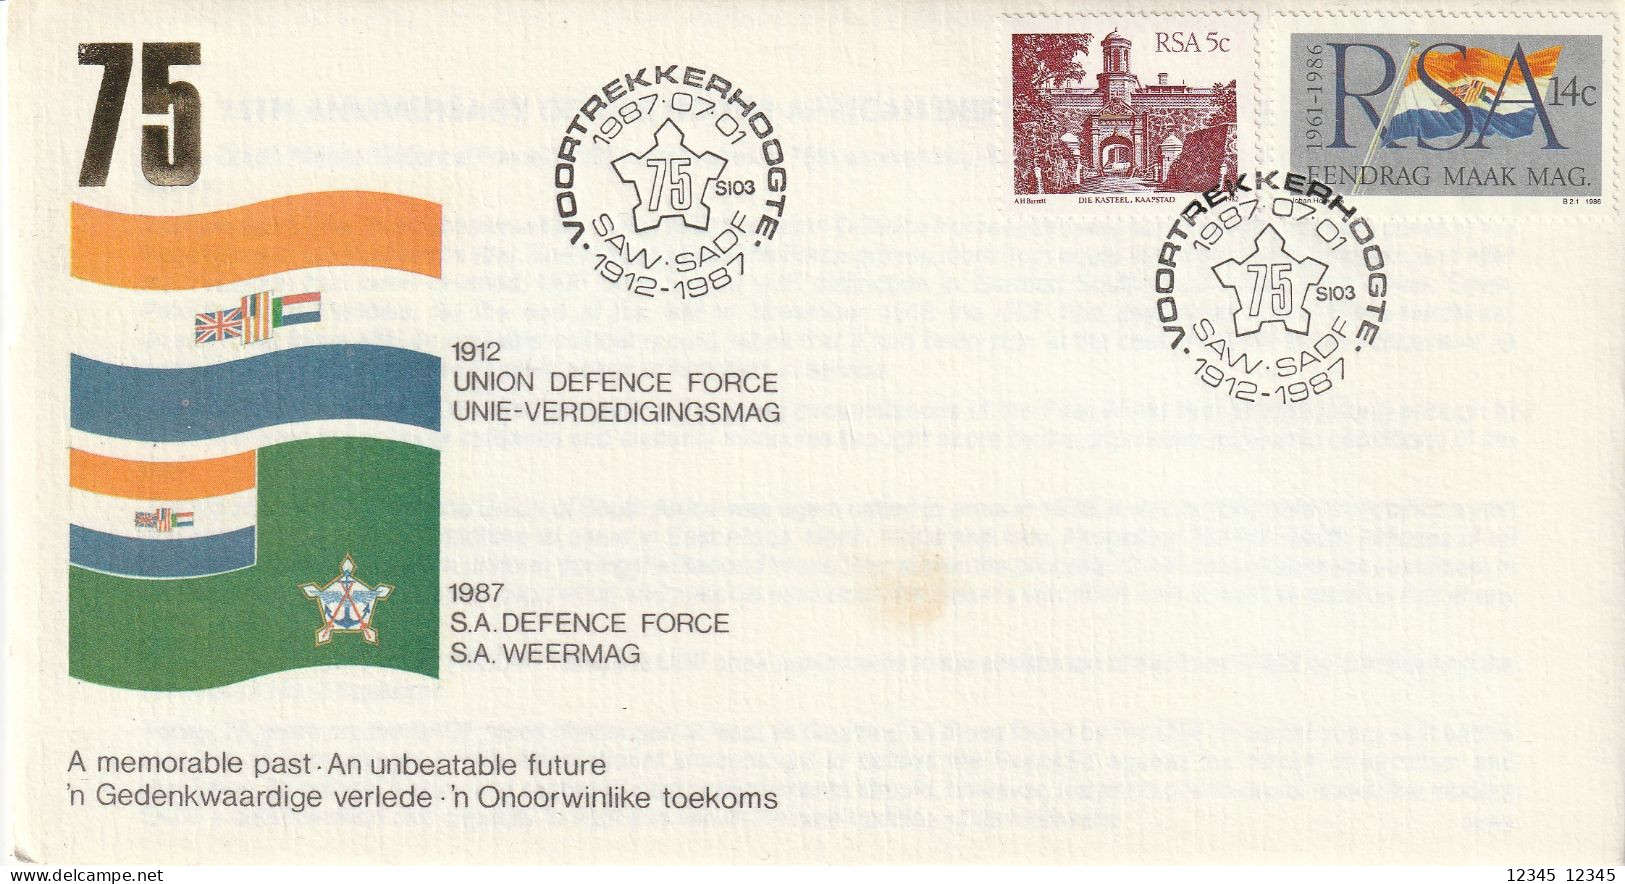 Zuid Afrika 1987, 1912 Union Defence Force 1987 S.A. Defence Force - Storia Postale